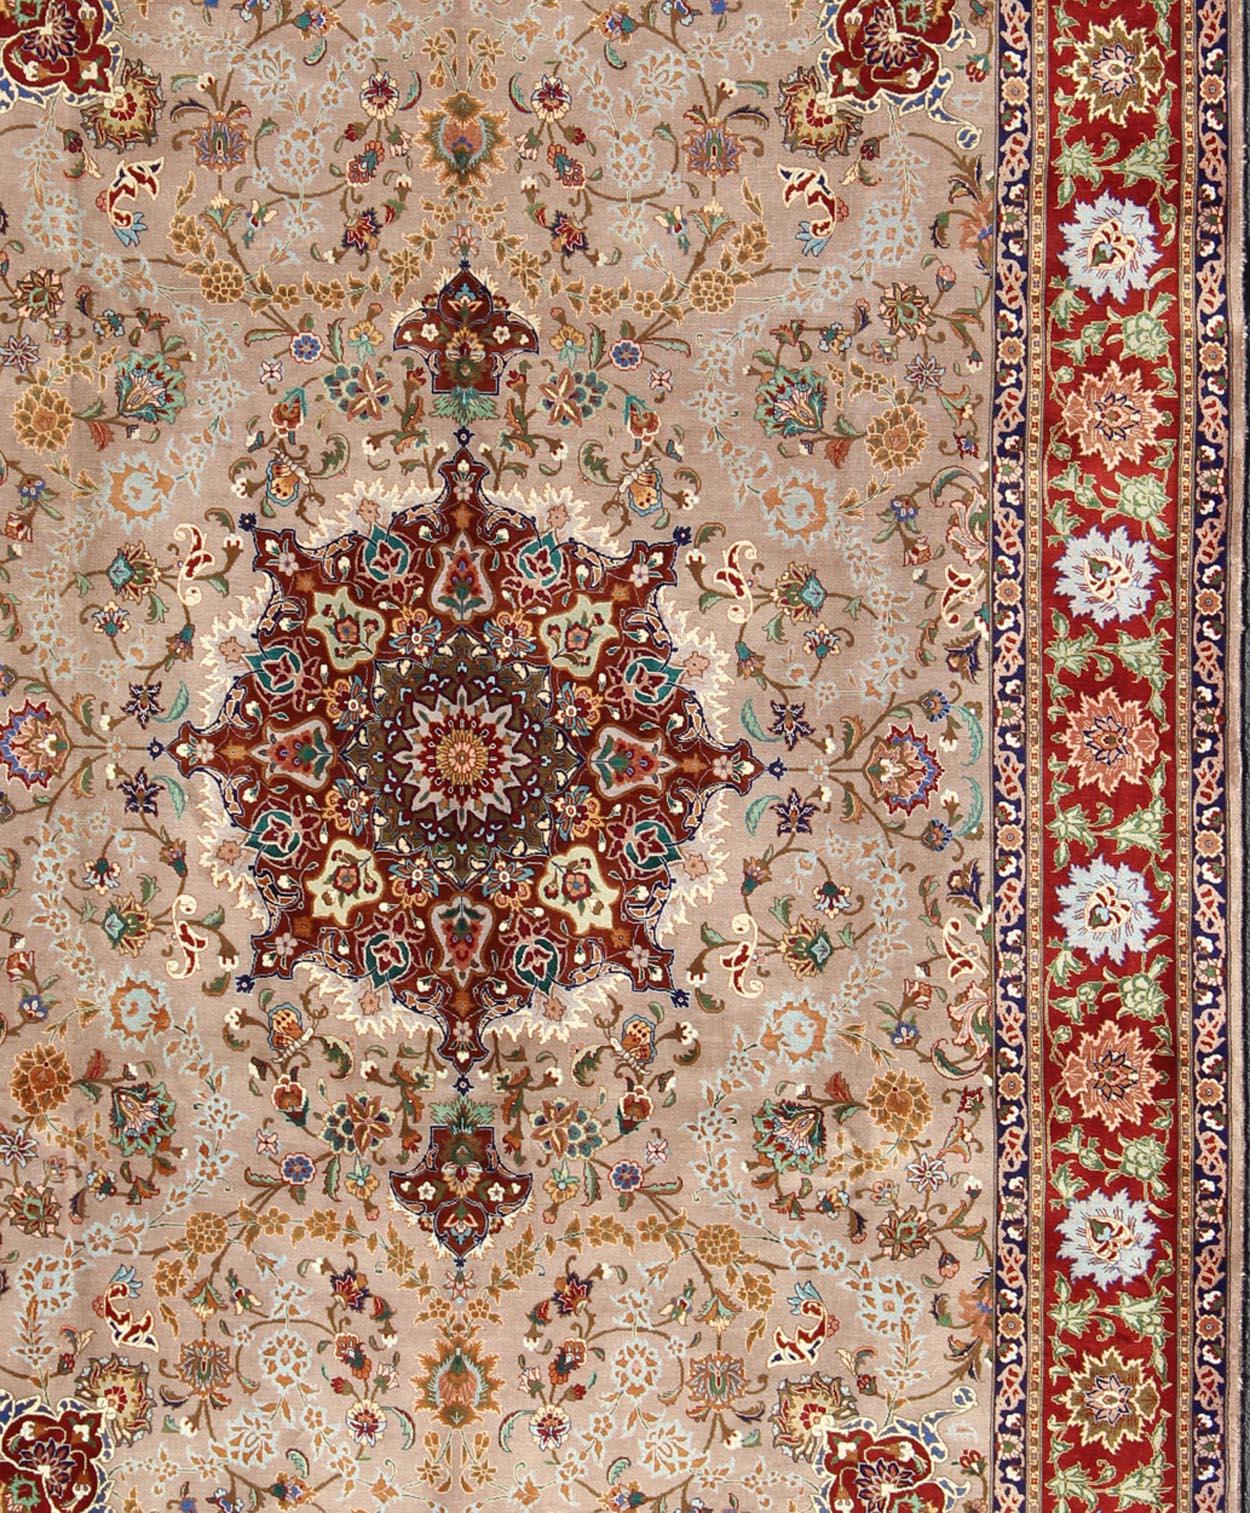 Tabriz Vintage rug from Persia with all-over Floral design in Ivory, red, green, and taupe, rug H-702-14, country of origin / type: Iran / Tabriz, circa 1940

This vintage Persian Tabriz carpet (circa mid-20th century) features a refined palate of